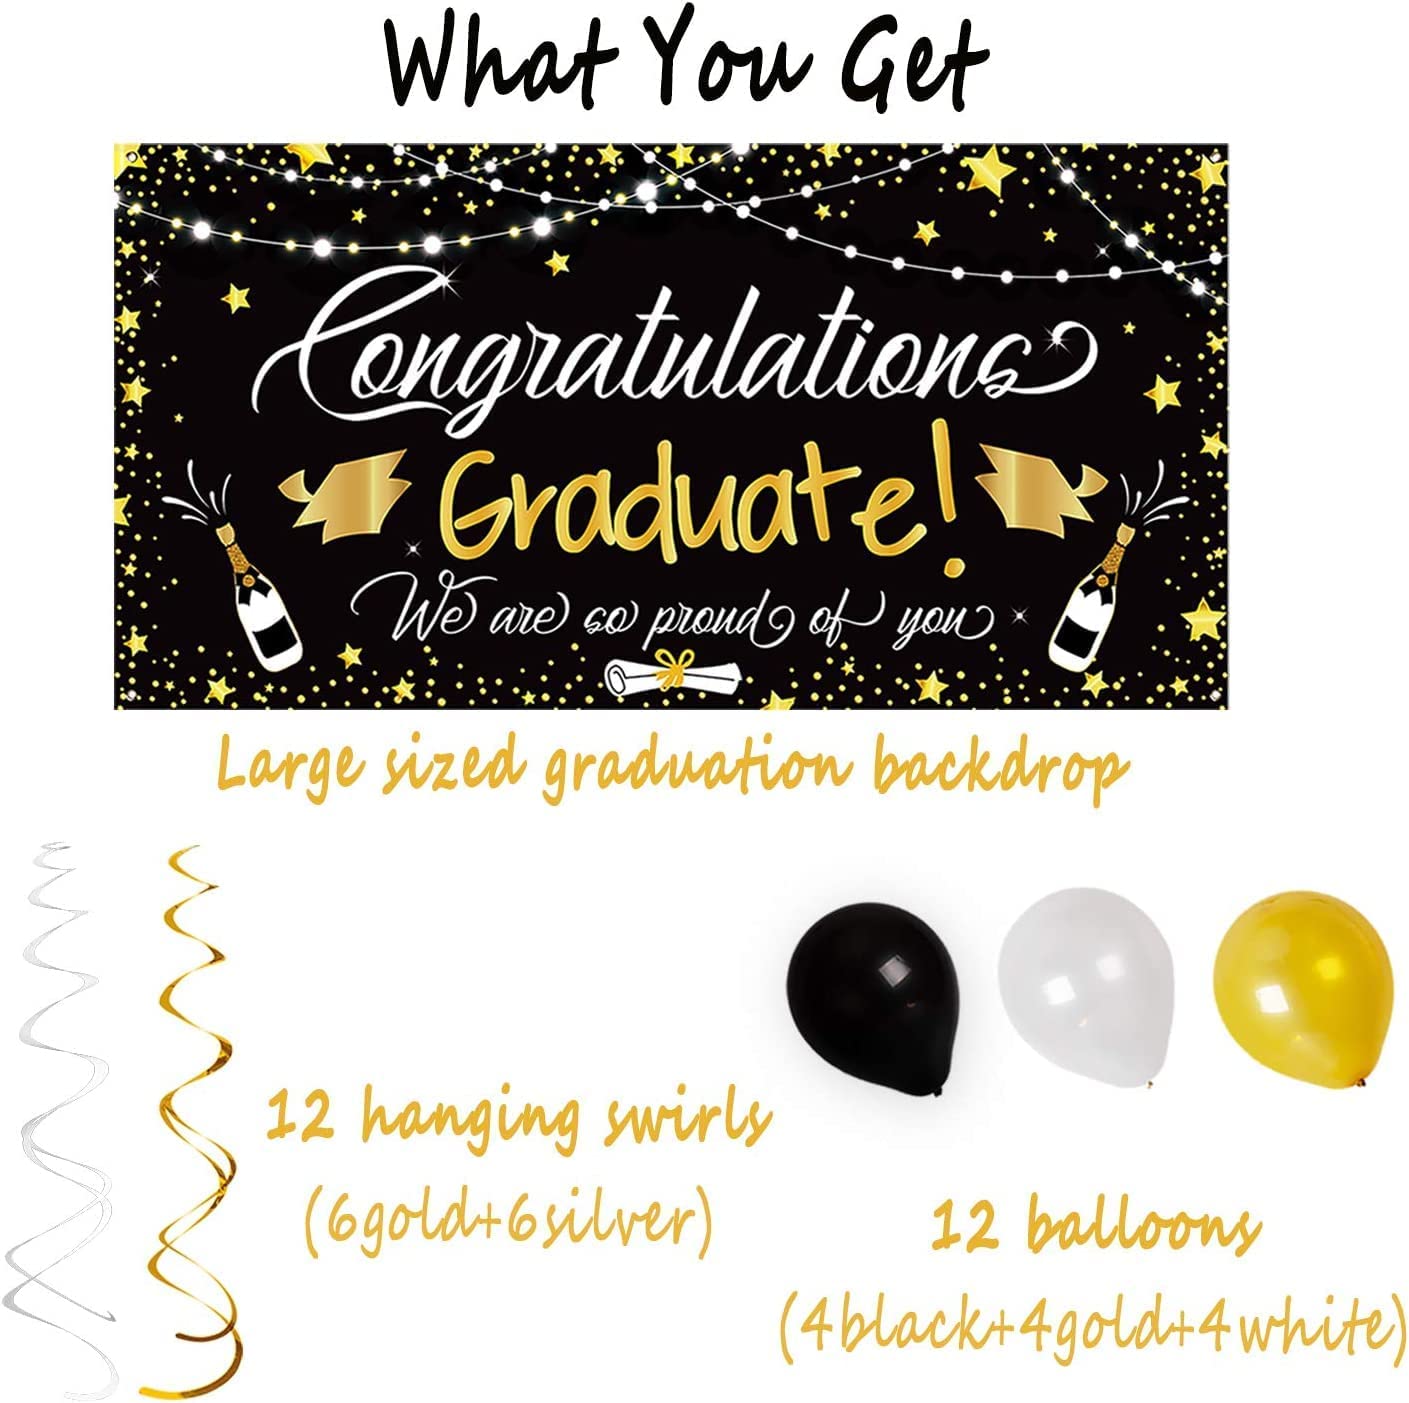 Graduation party poster and decorations, including balloons and a large background banner to congratulate the graduation